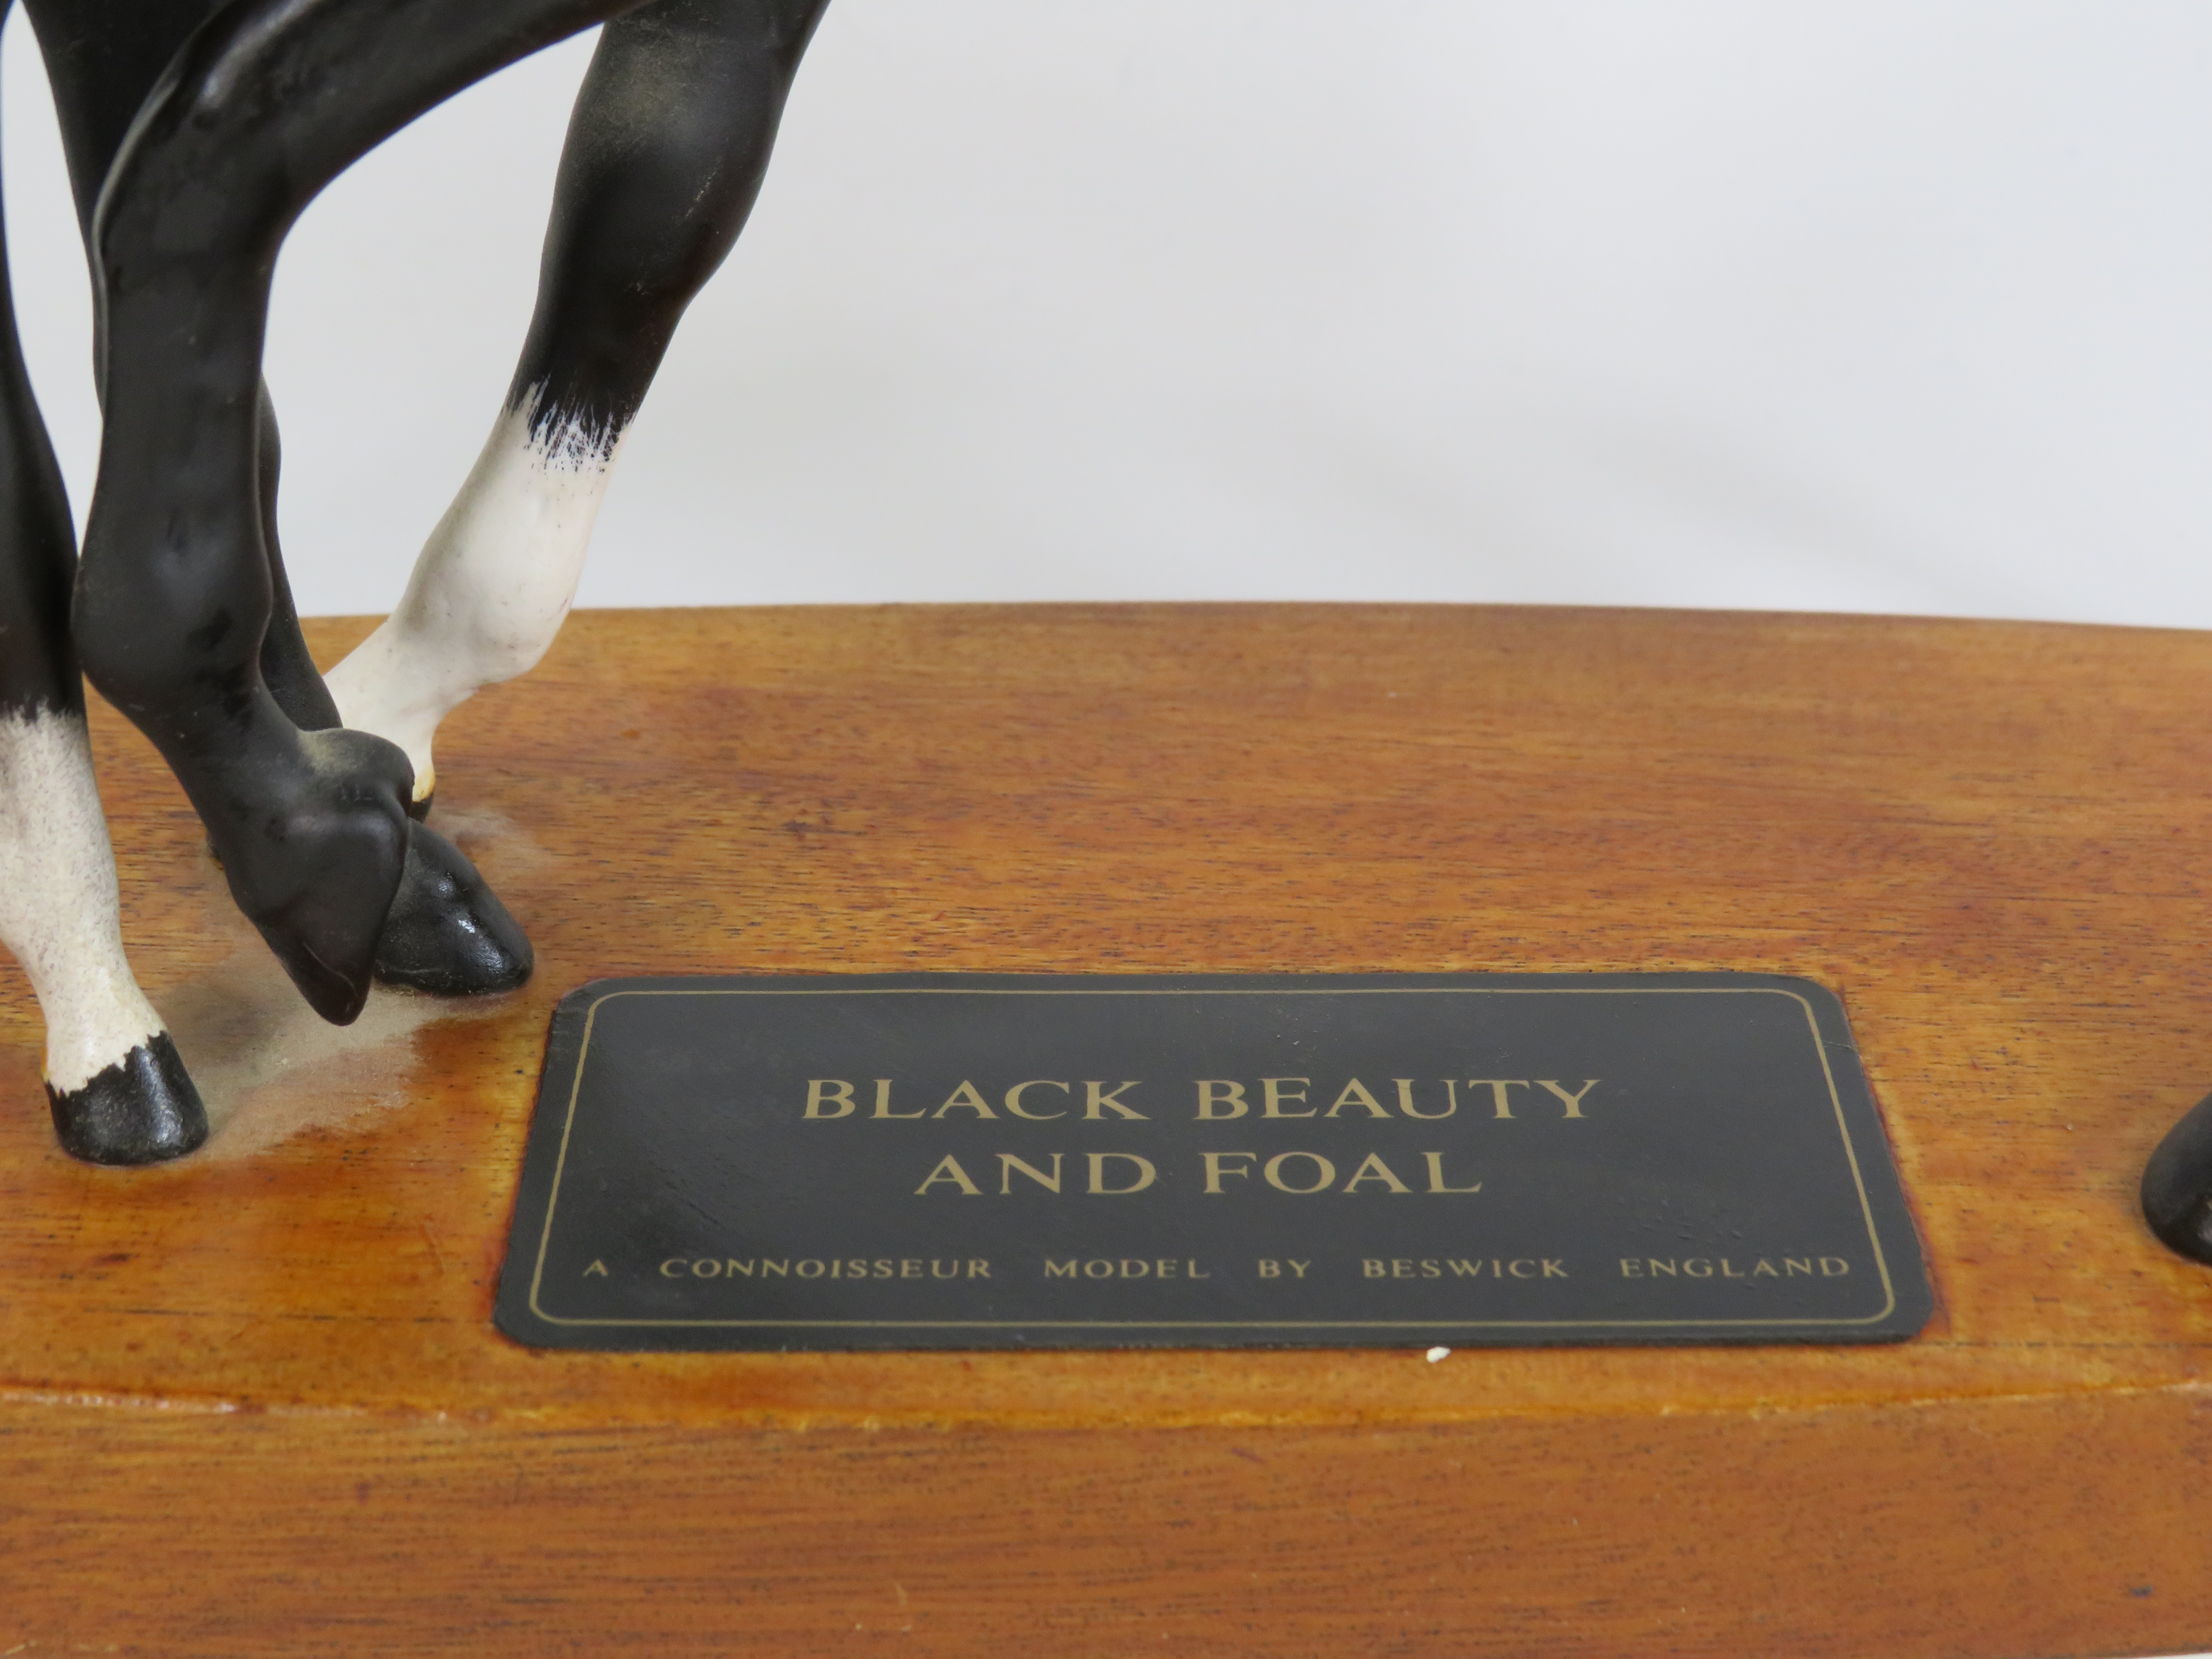 Beswick Connoisseur model of Black beauty and foal standing on a wooden plinth. - Image 3 of 3